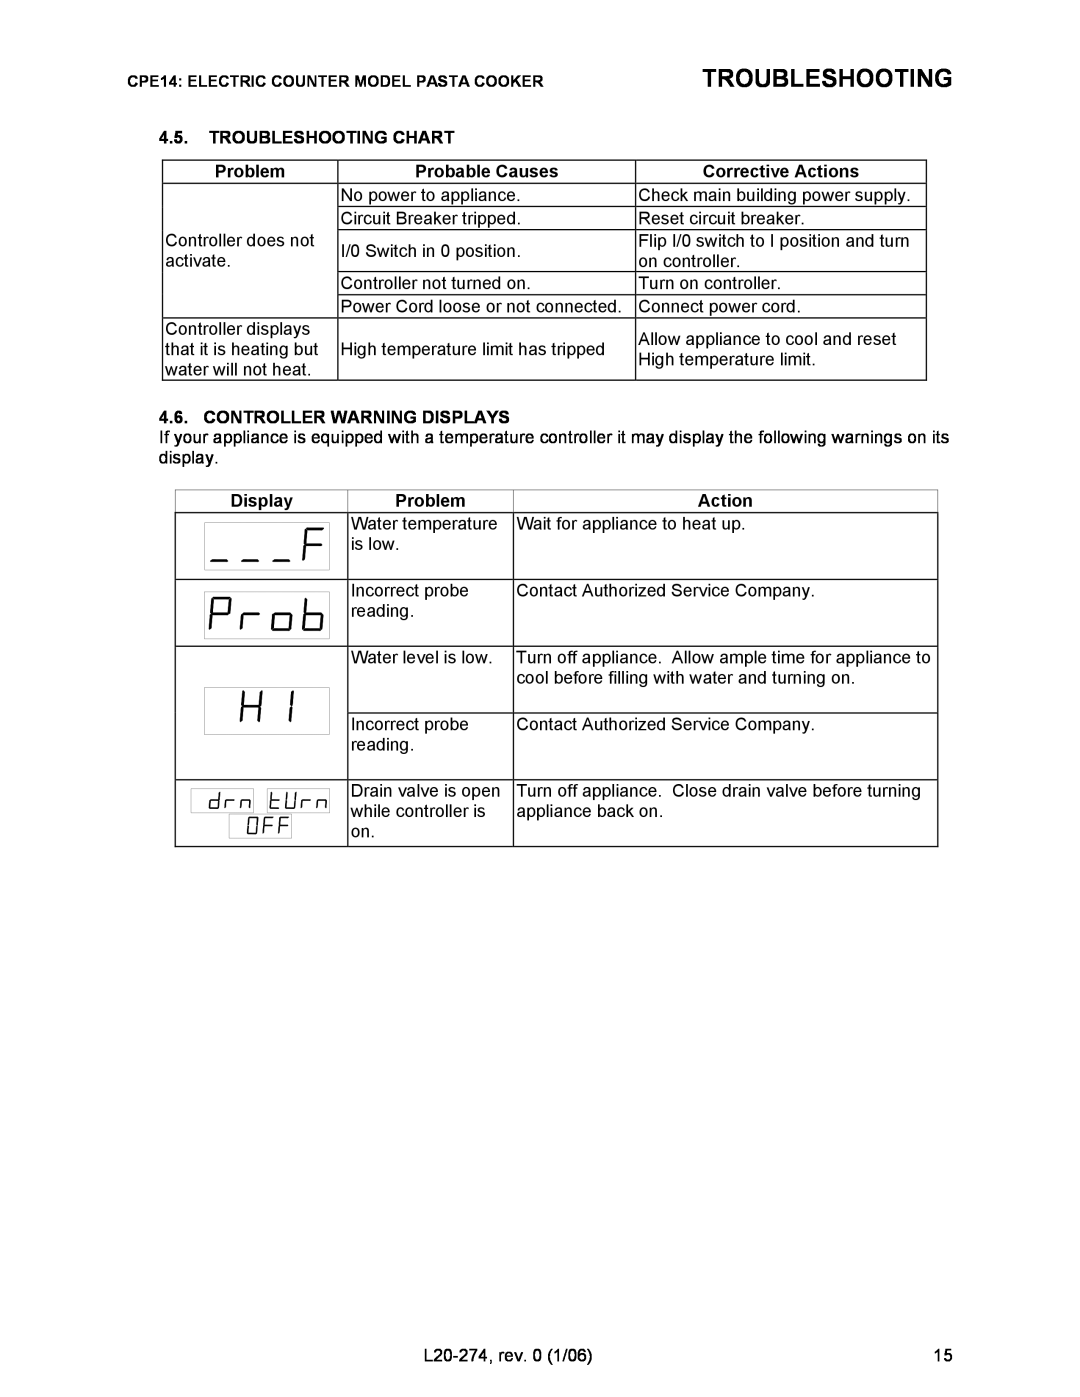 Pitco Frialator RSCPE14 operation manual Troubleshooting Chart, Problem, Probable Causes, Corrective Actions, Display 